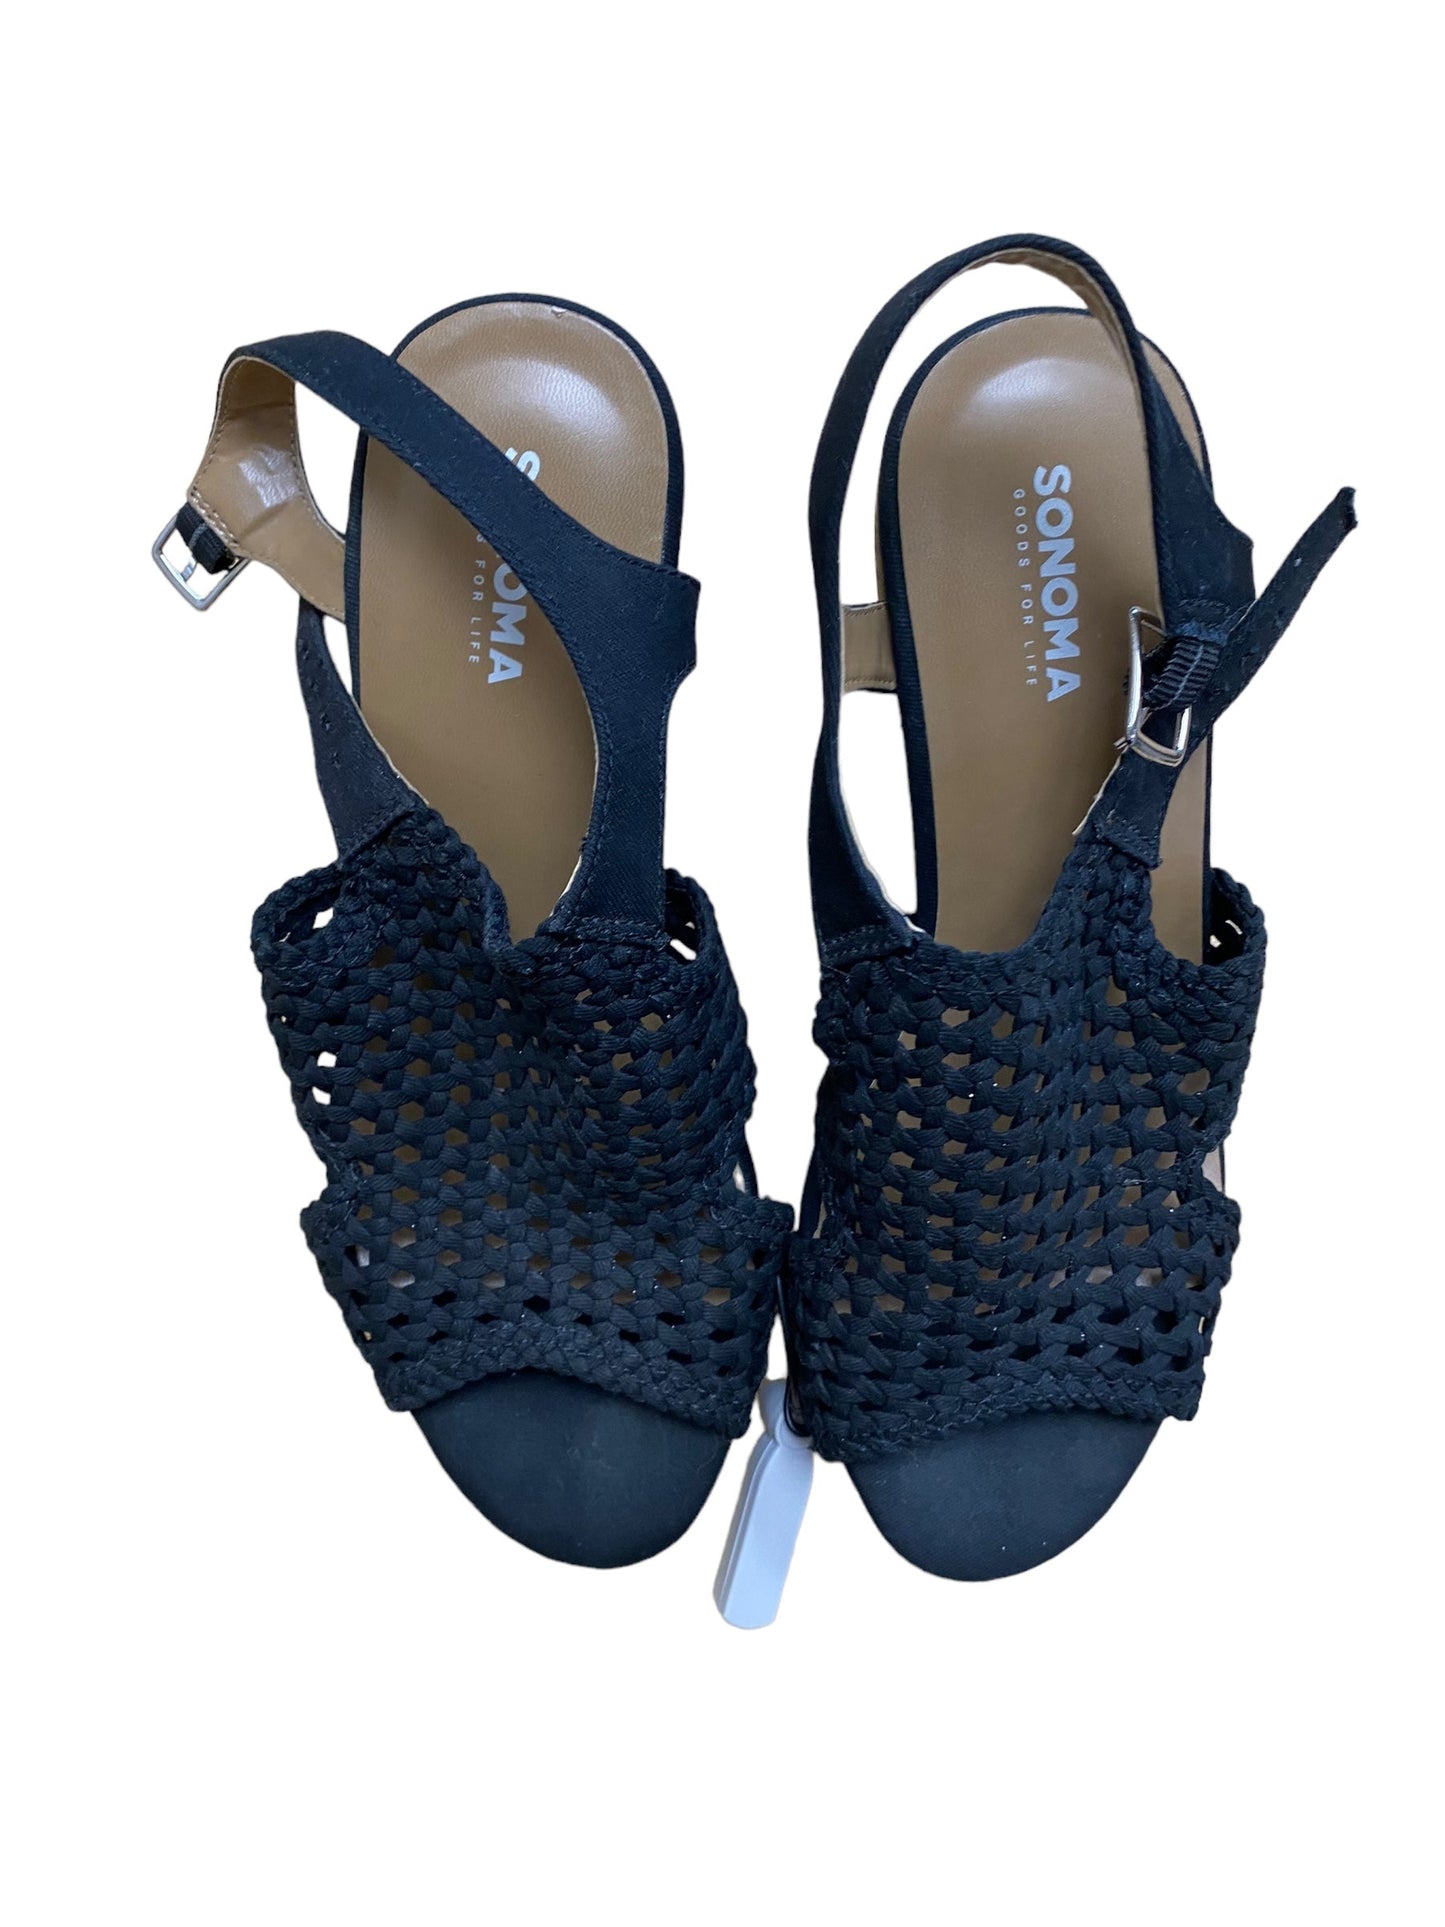 Sandals Heels Wedge By Sonoma  Size: 9